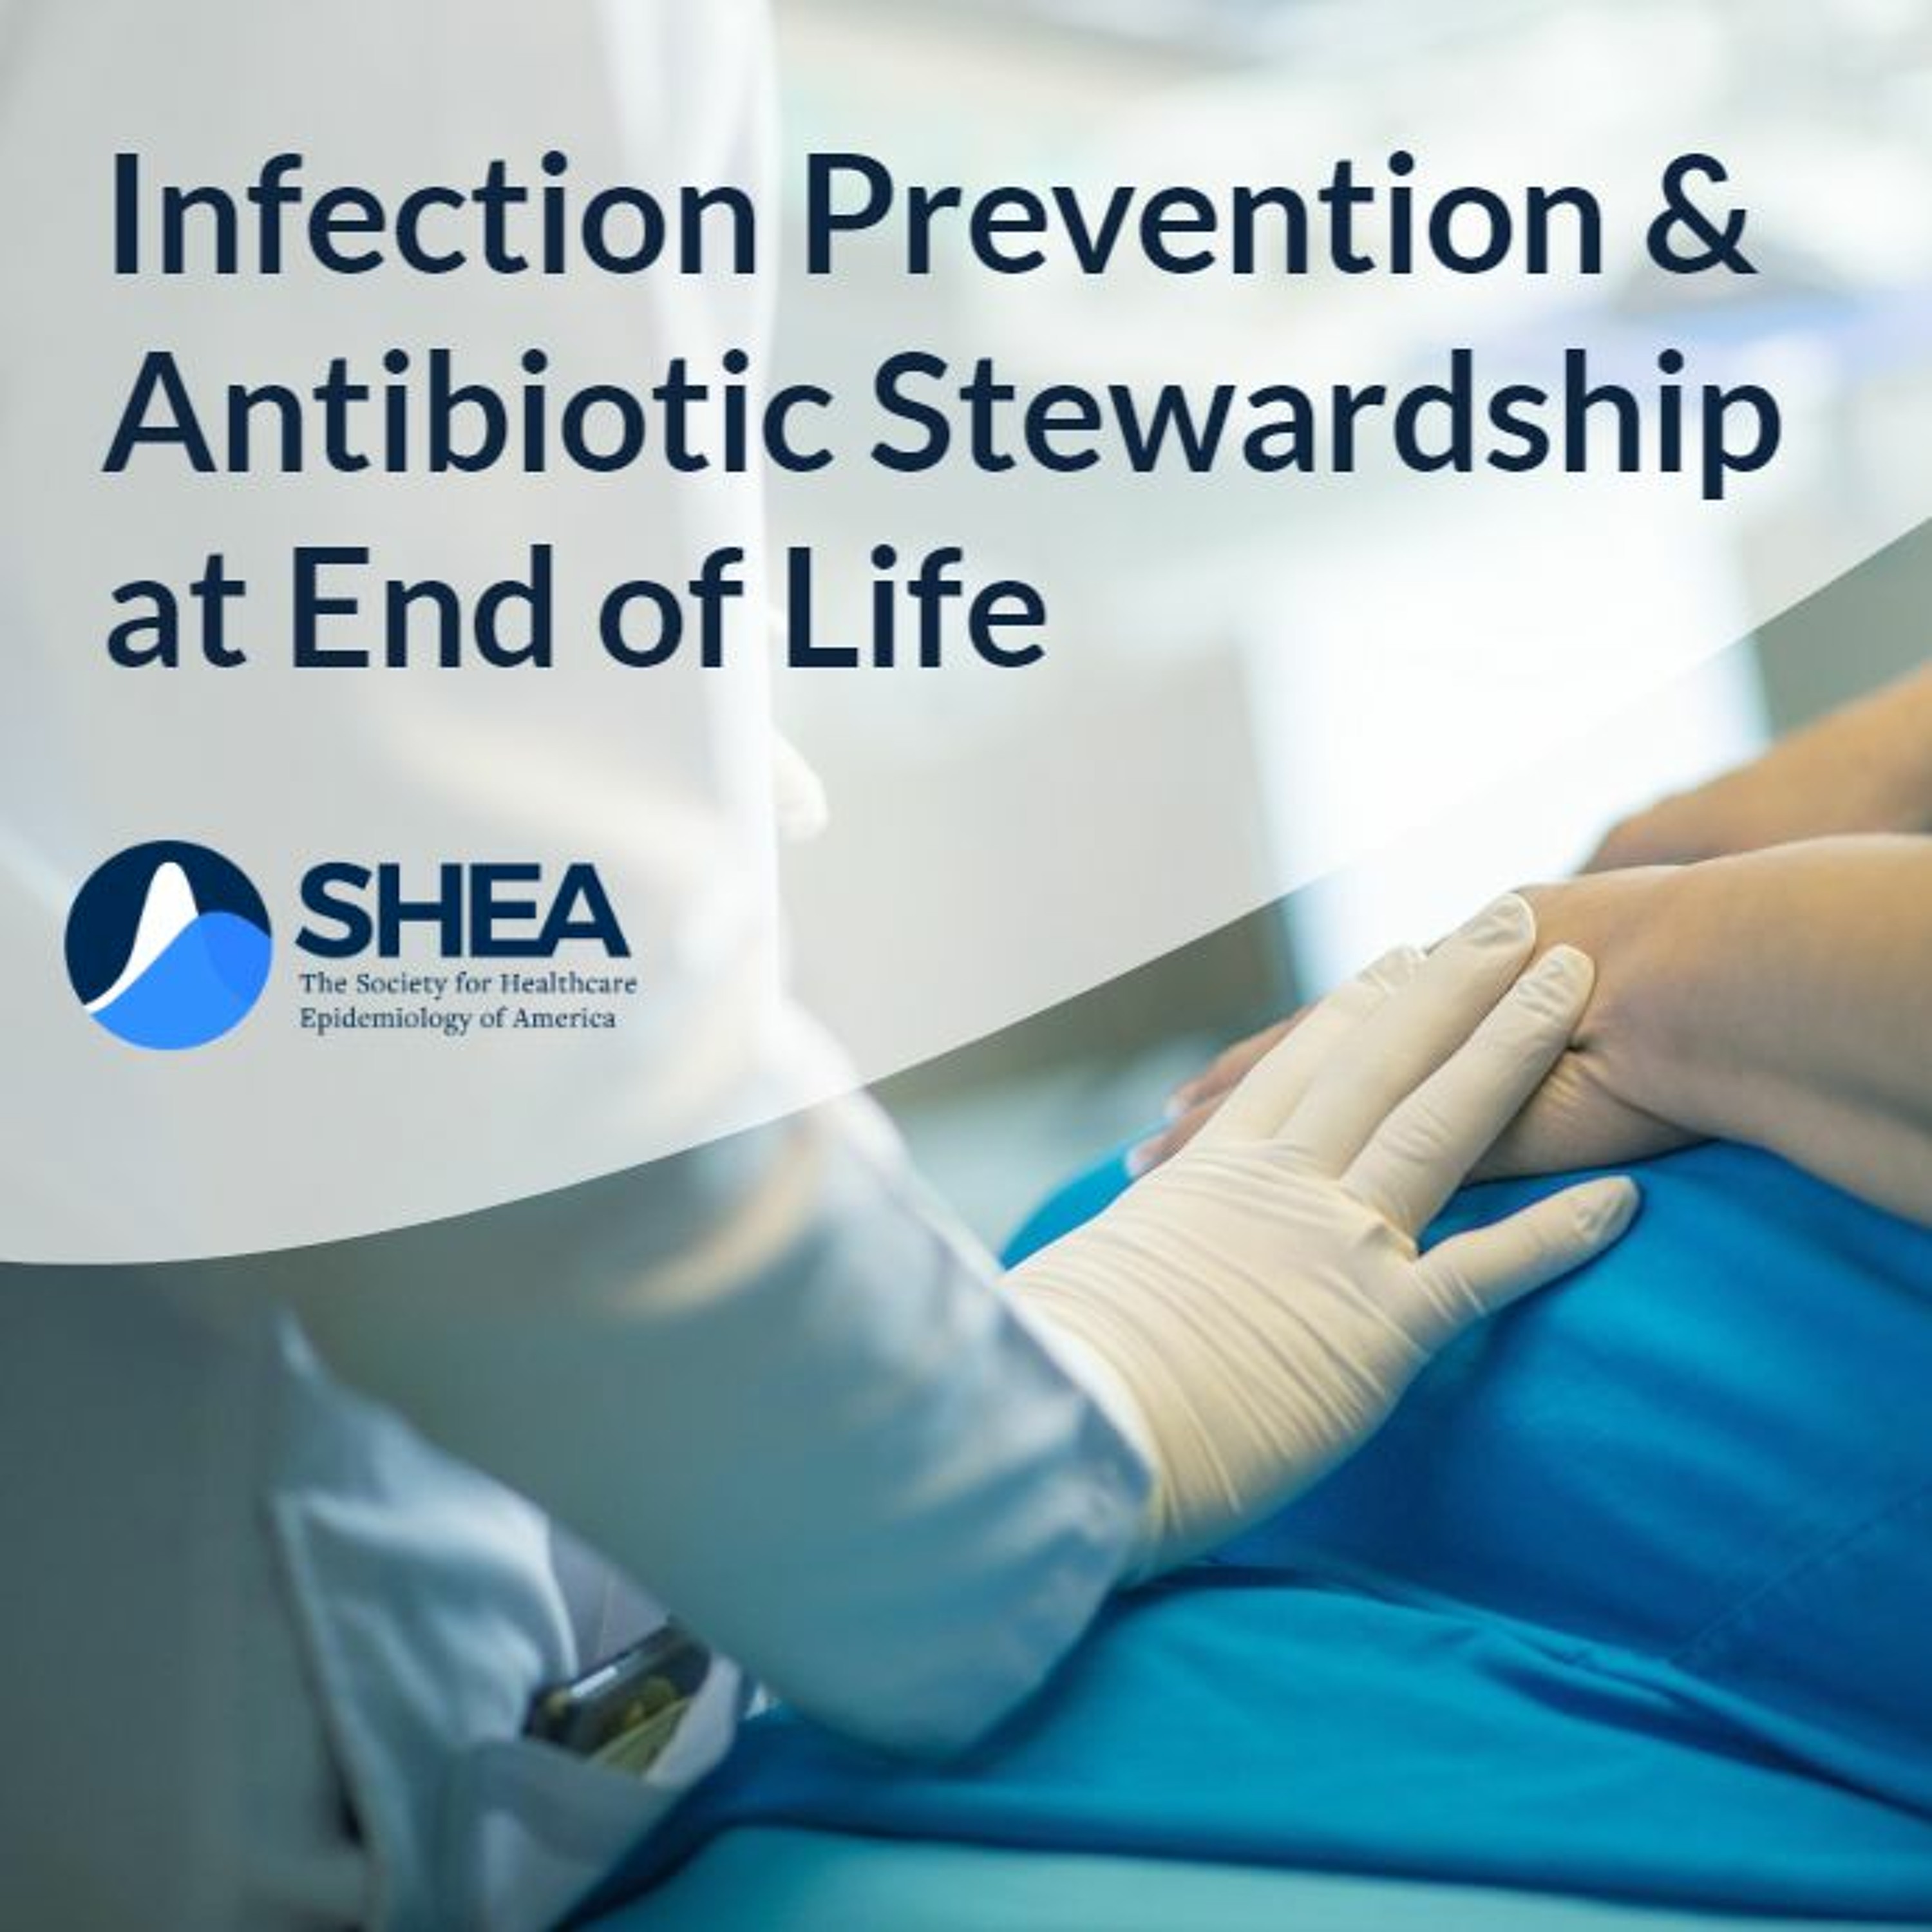 Infection Prevention at End of Life: Should Our Approach Be Different?